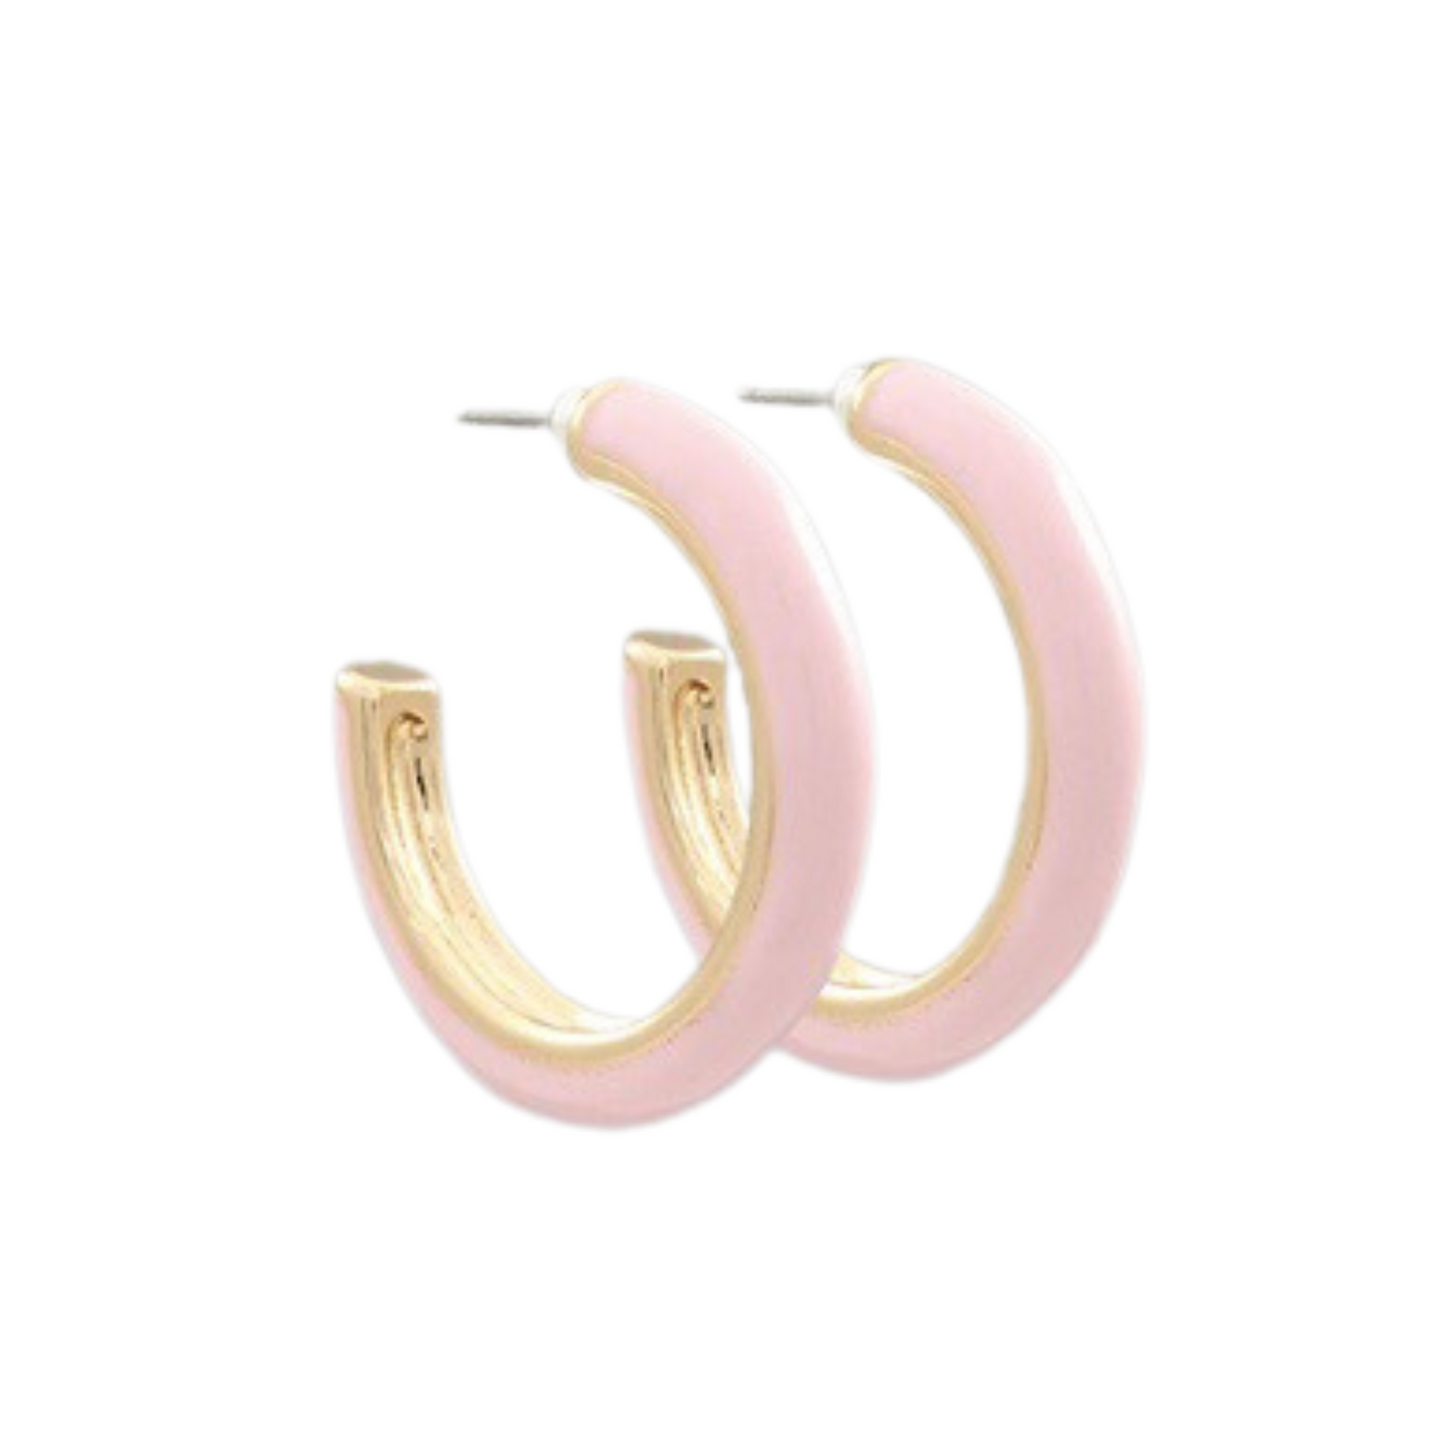 Our Colored Hoops add a colorful touch to any outfit, with two beautiful shades to choose from - pink and ivory. Crafted from lightweight material, they're comfortable to wear all day long. Brighten up your wardrobe with our Colored Hoops!